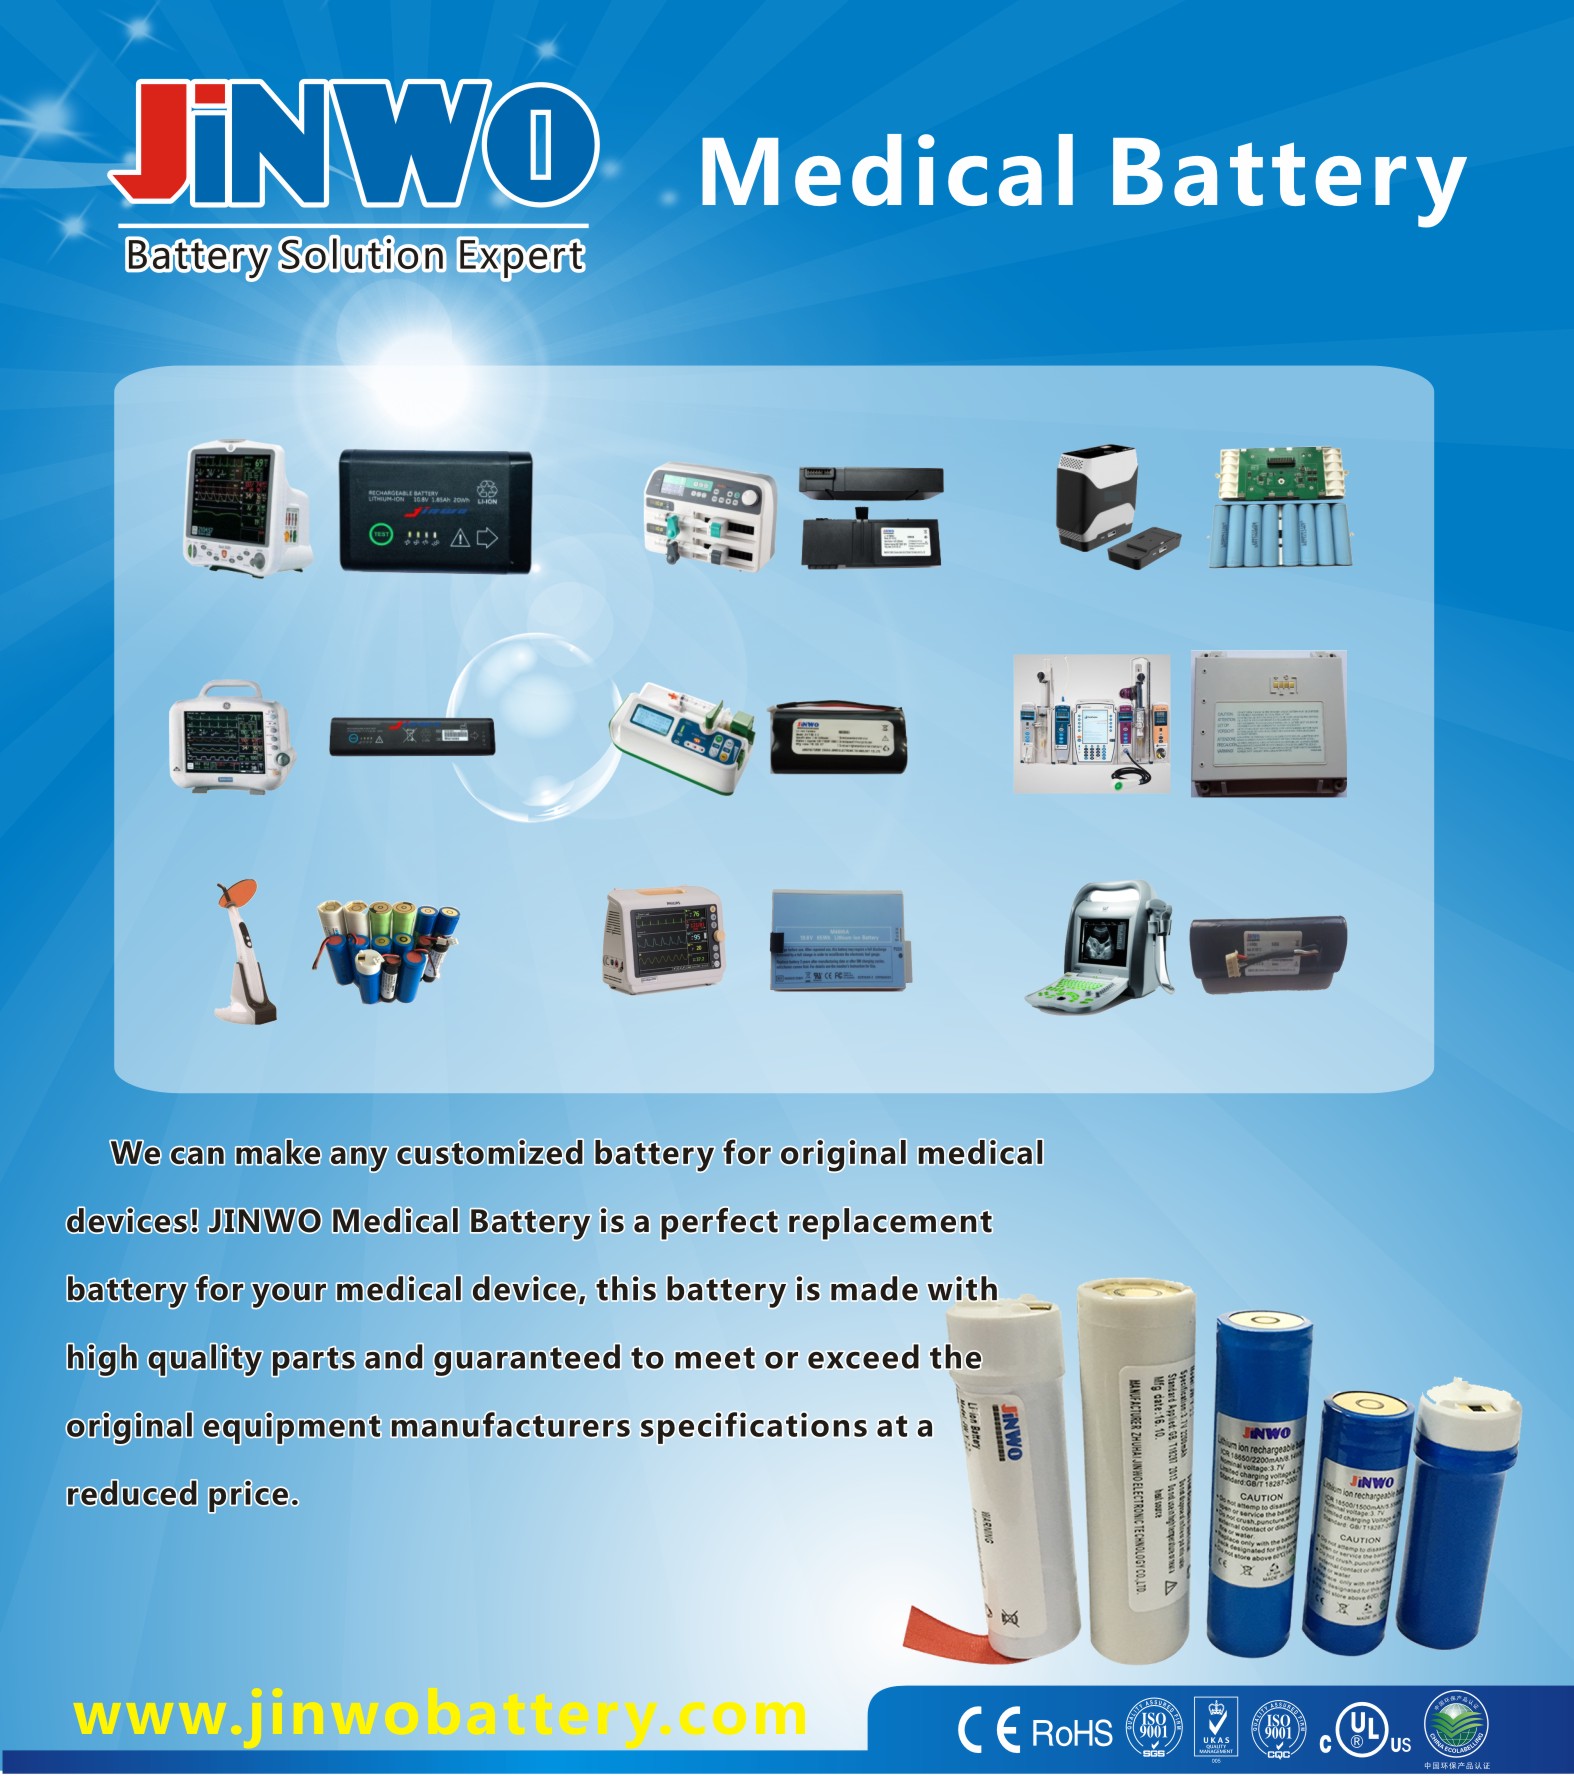 Medical Devices Battery Solution